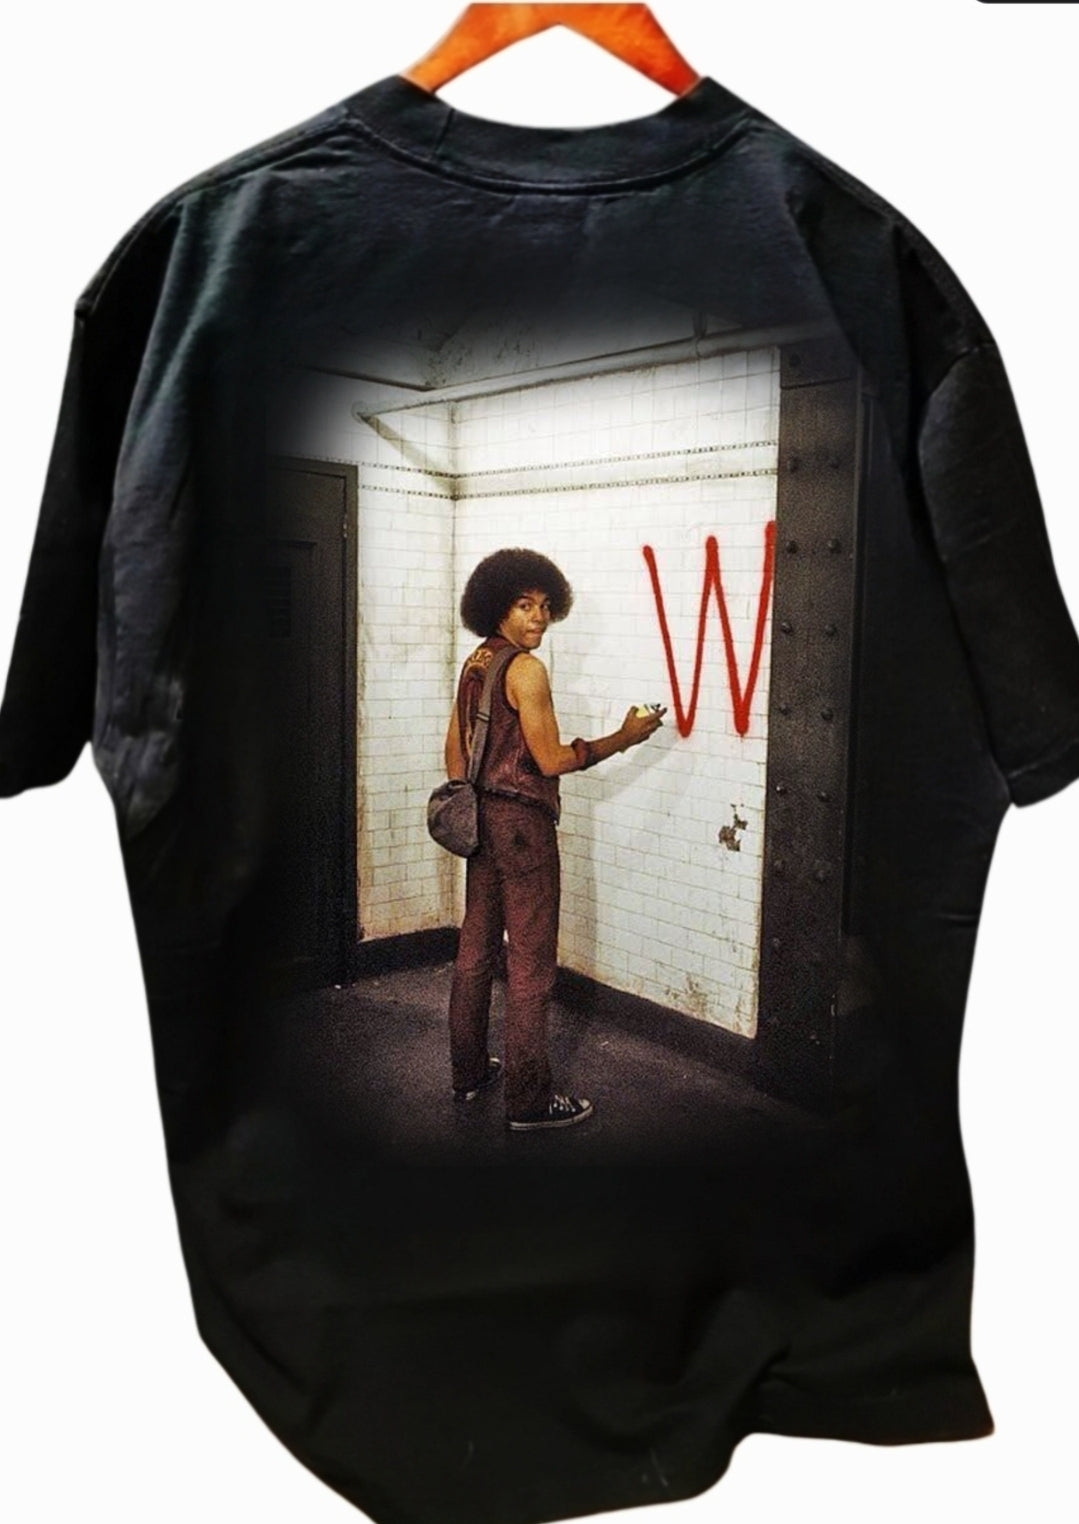 REMBRANDT FROM THE WARRIORS TAGGING WALL ON SHAKA SUPERMAX HEAVYWEIGHT GARMET DYED T SHIRT